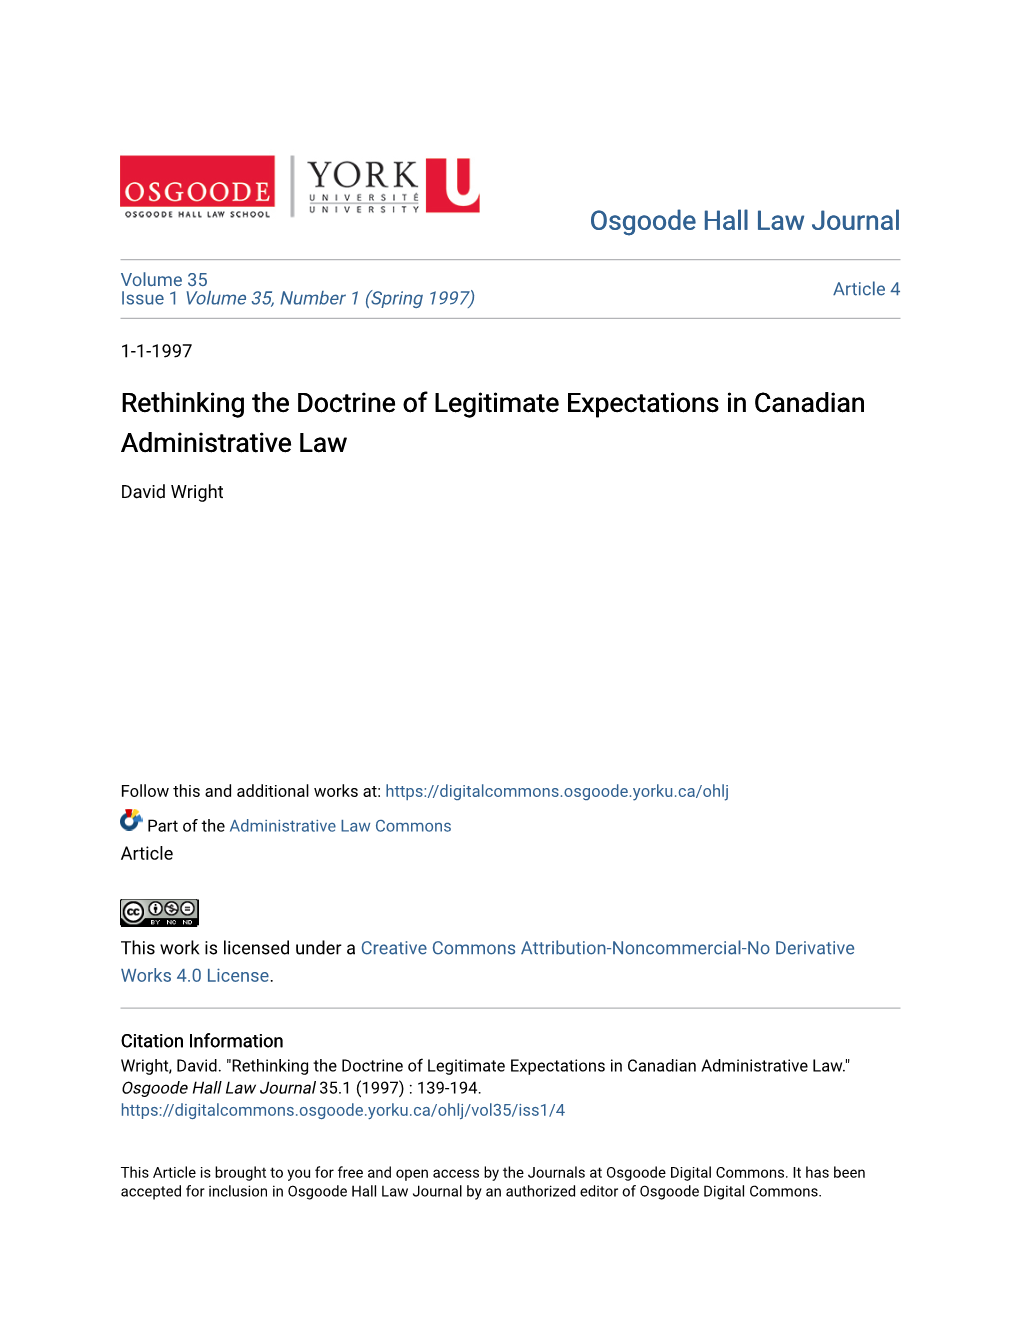 Rethinking the Doctrine of Legitimate Expectations in Canadian Administrative Law